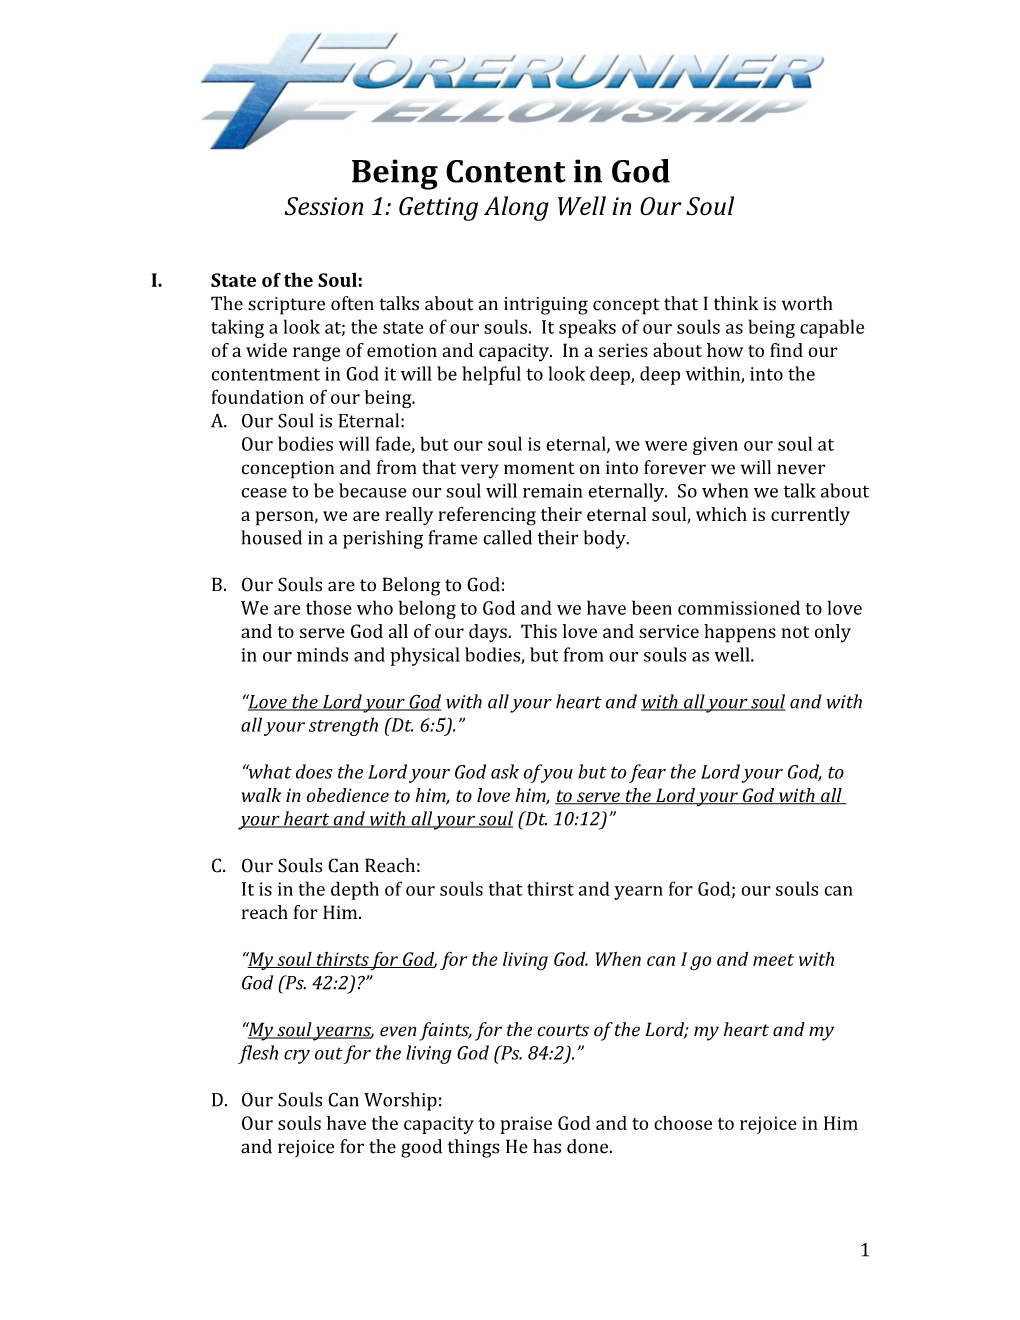 Being Content in God